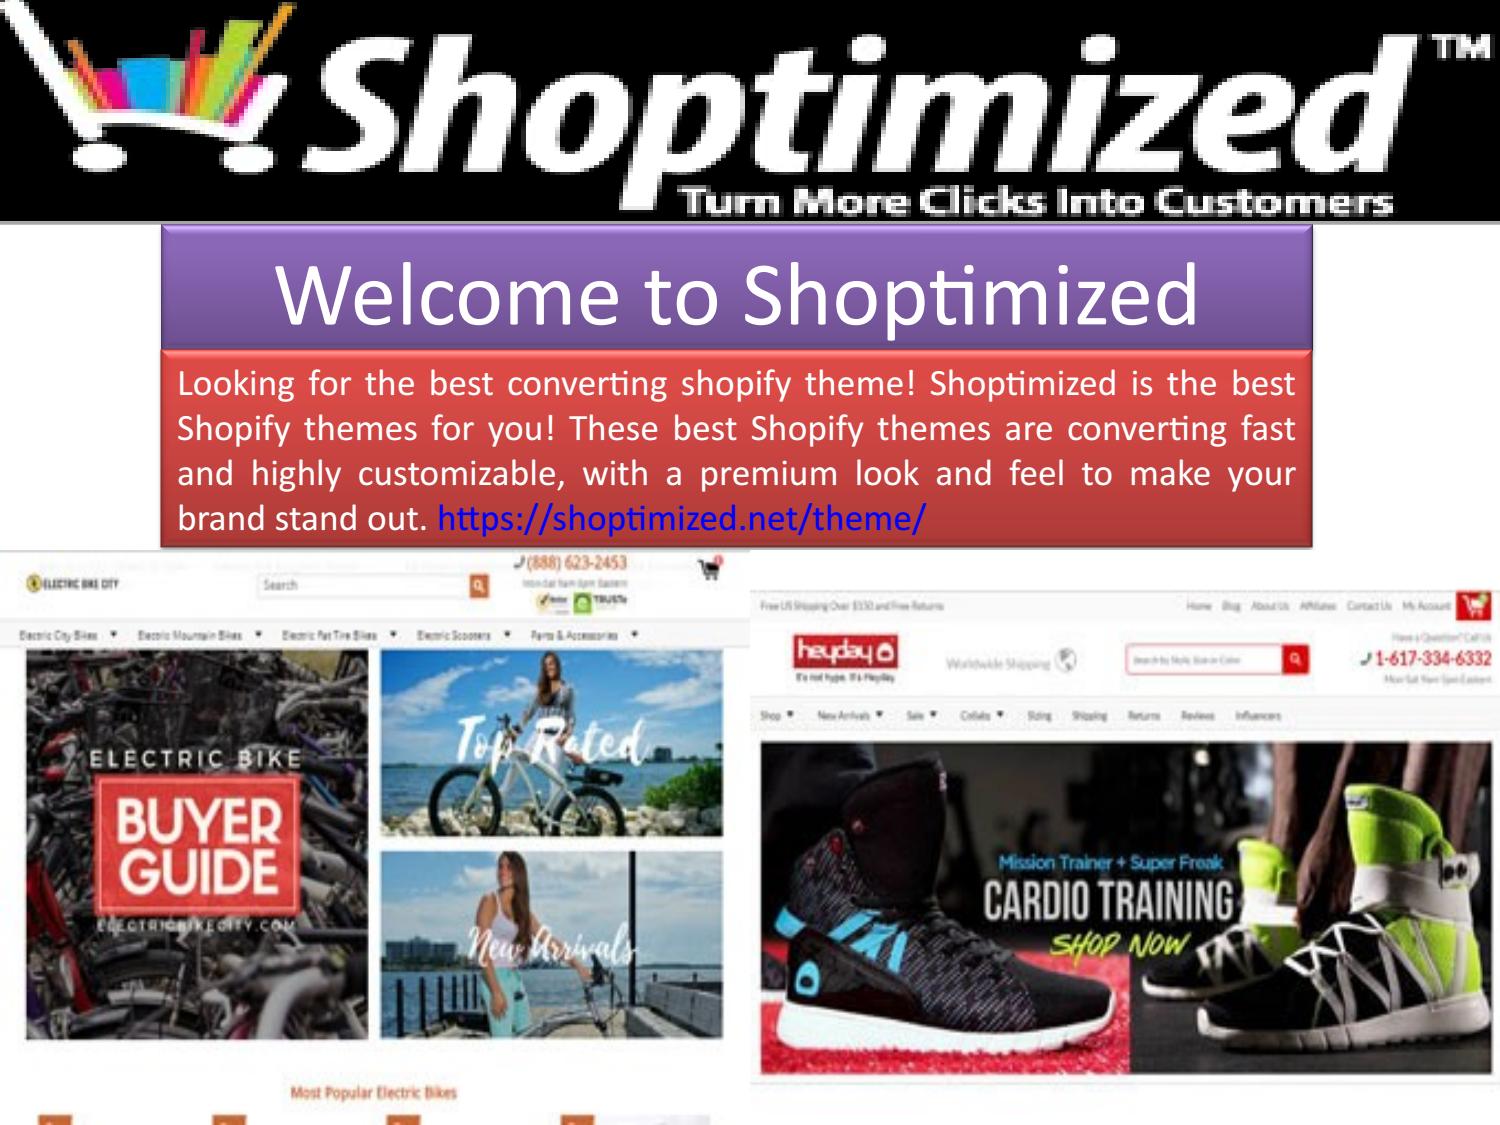 Shoptimized offers everything you need to effortlessly build, grow and scale your e-commerce empire